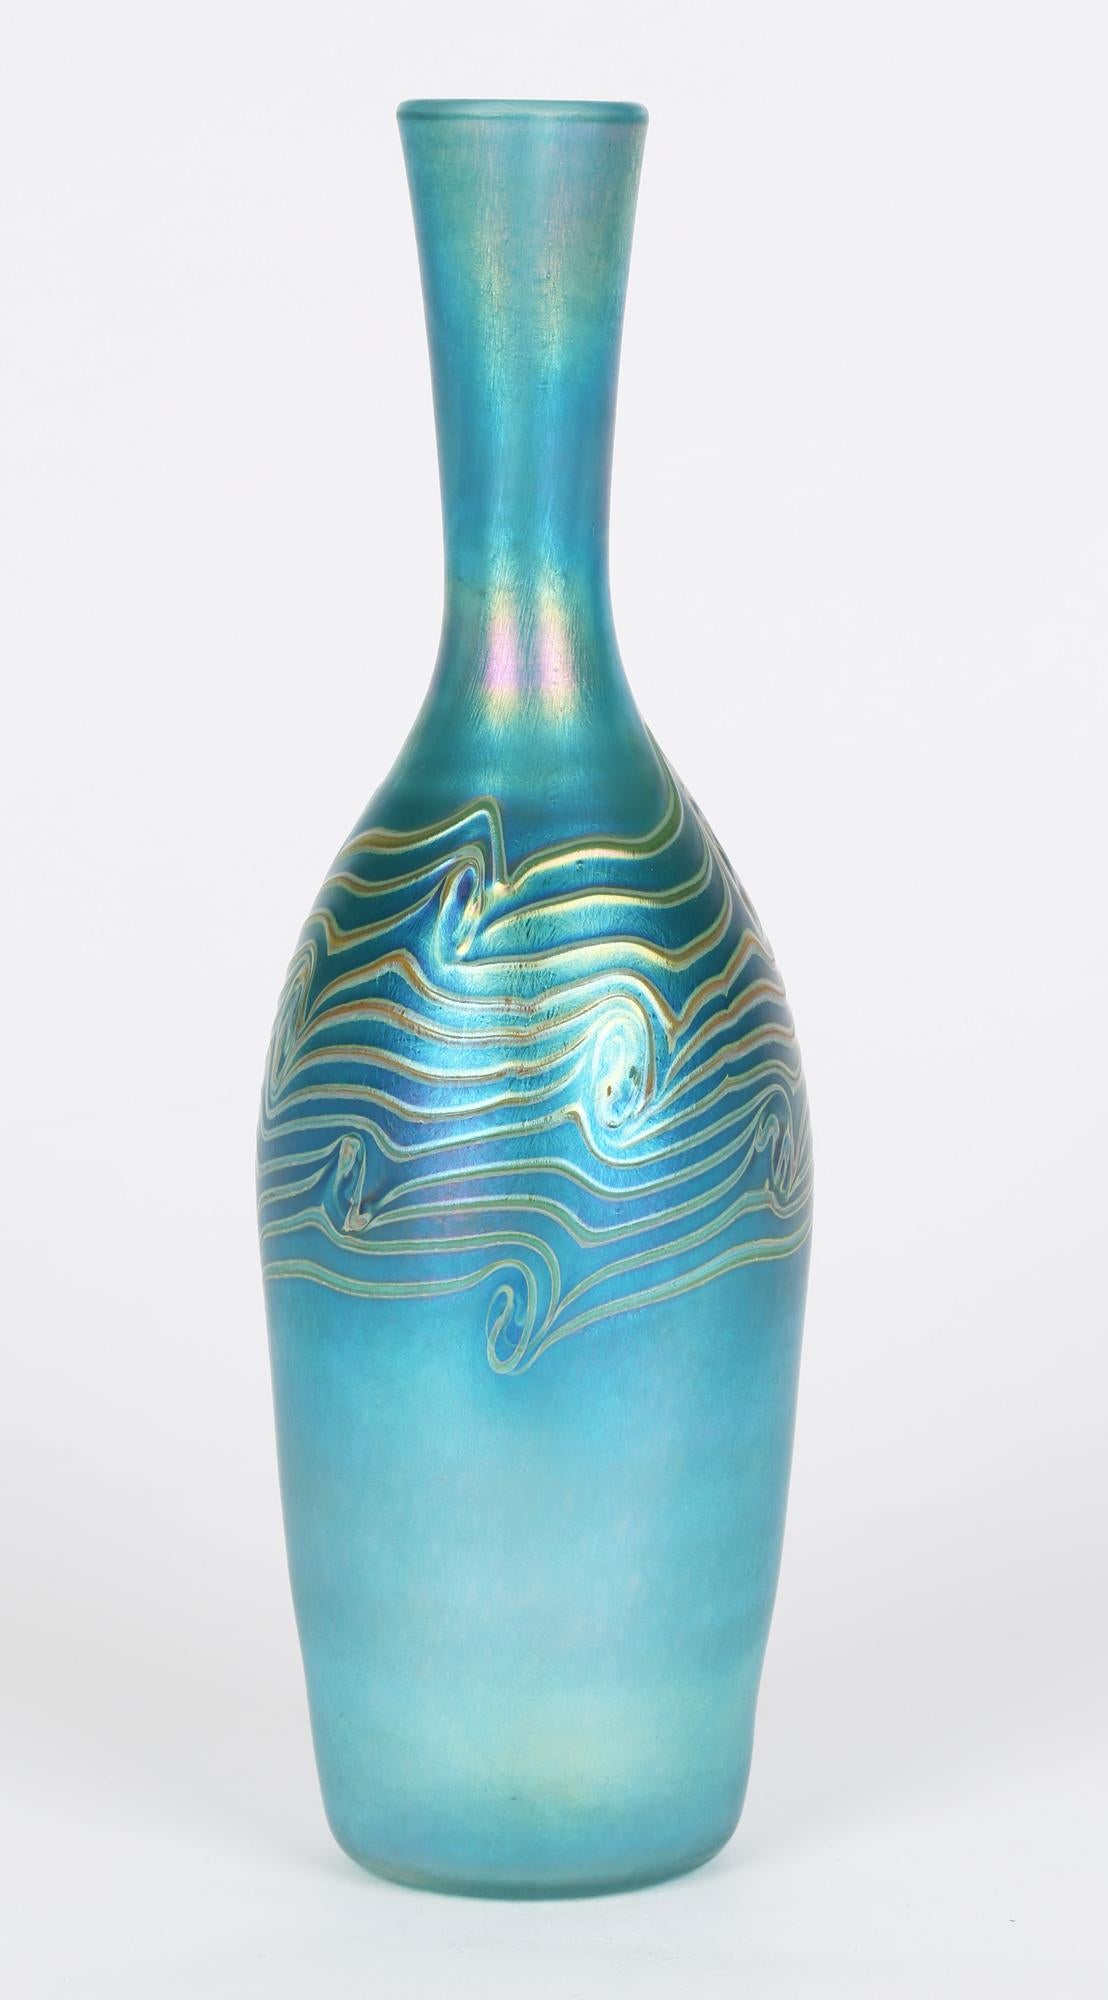 floor vase with peacock feathers